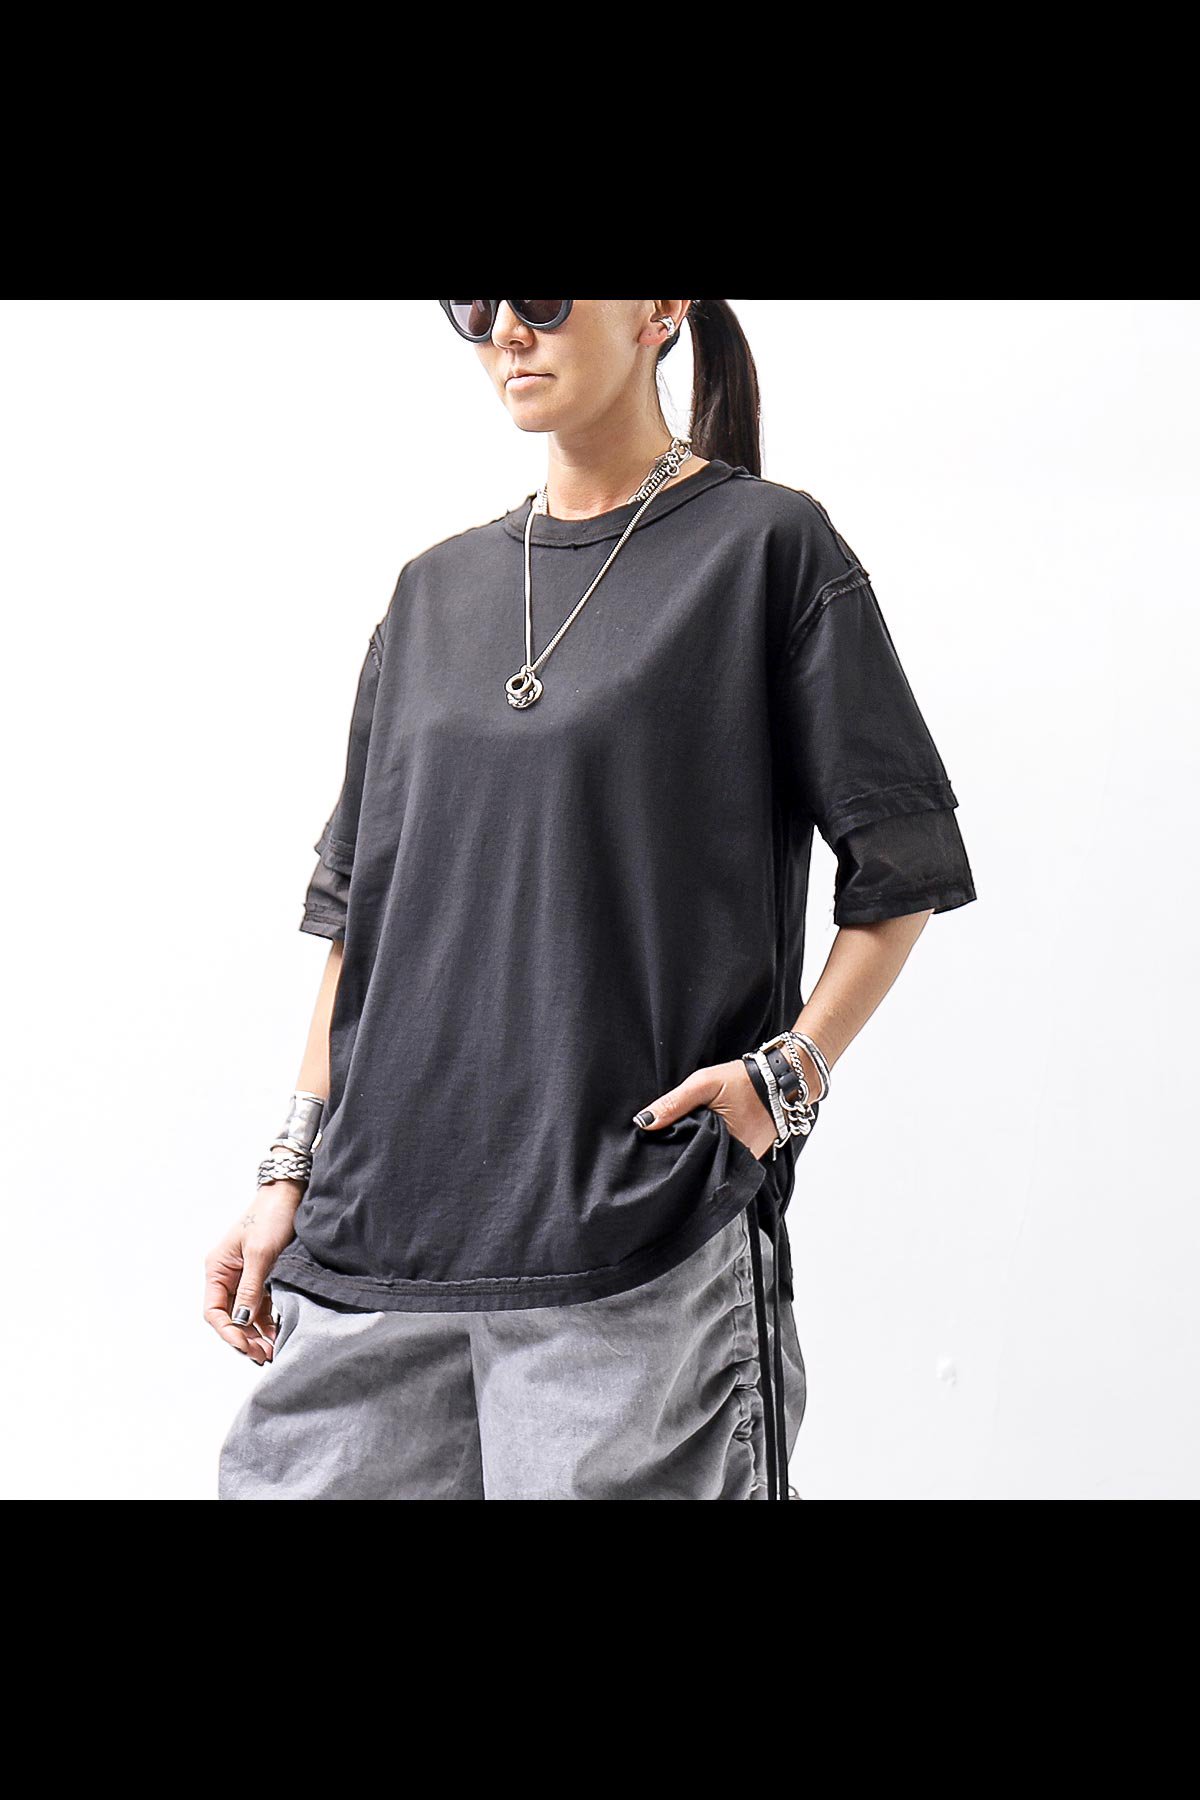 <img class='new_mark_img1' src='https://img.shop-pro.jp/img/new/icons8.gif' style='border:none;display:inline;margin:0px;padding:0px;width:auto;' />UNISEX HALF SLEEVE LAYERED TOP OPH33B_BLACK